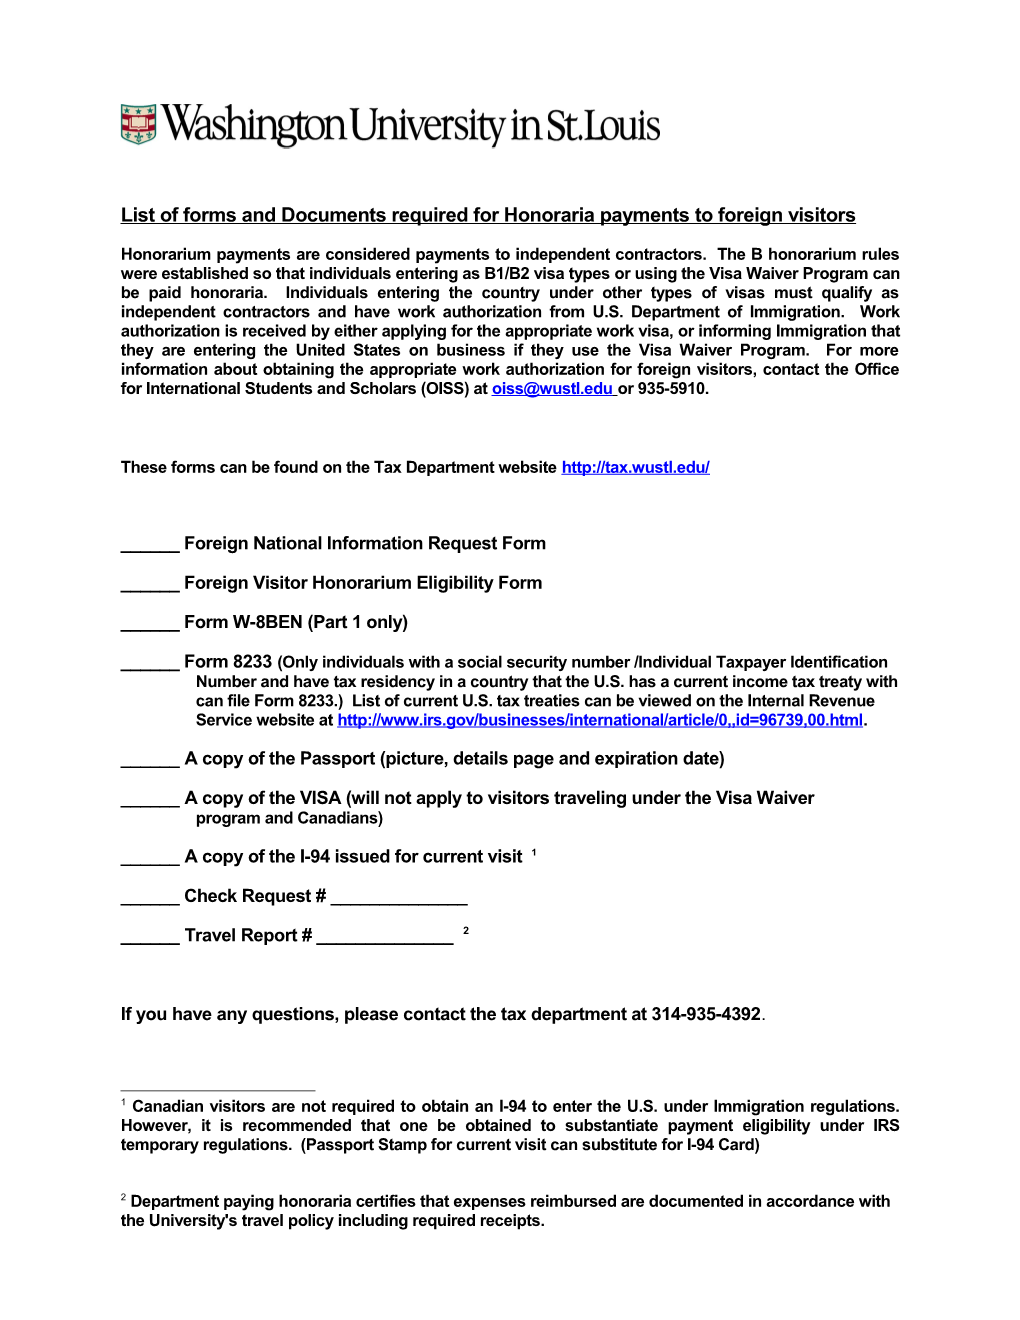 List of Forms and Documents Required for Honoraria Payments to Foreign Visitors